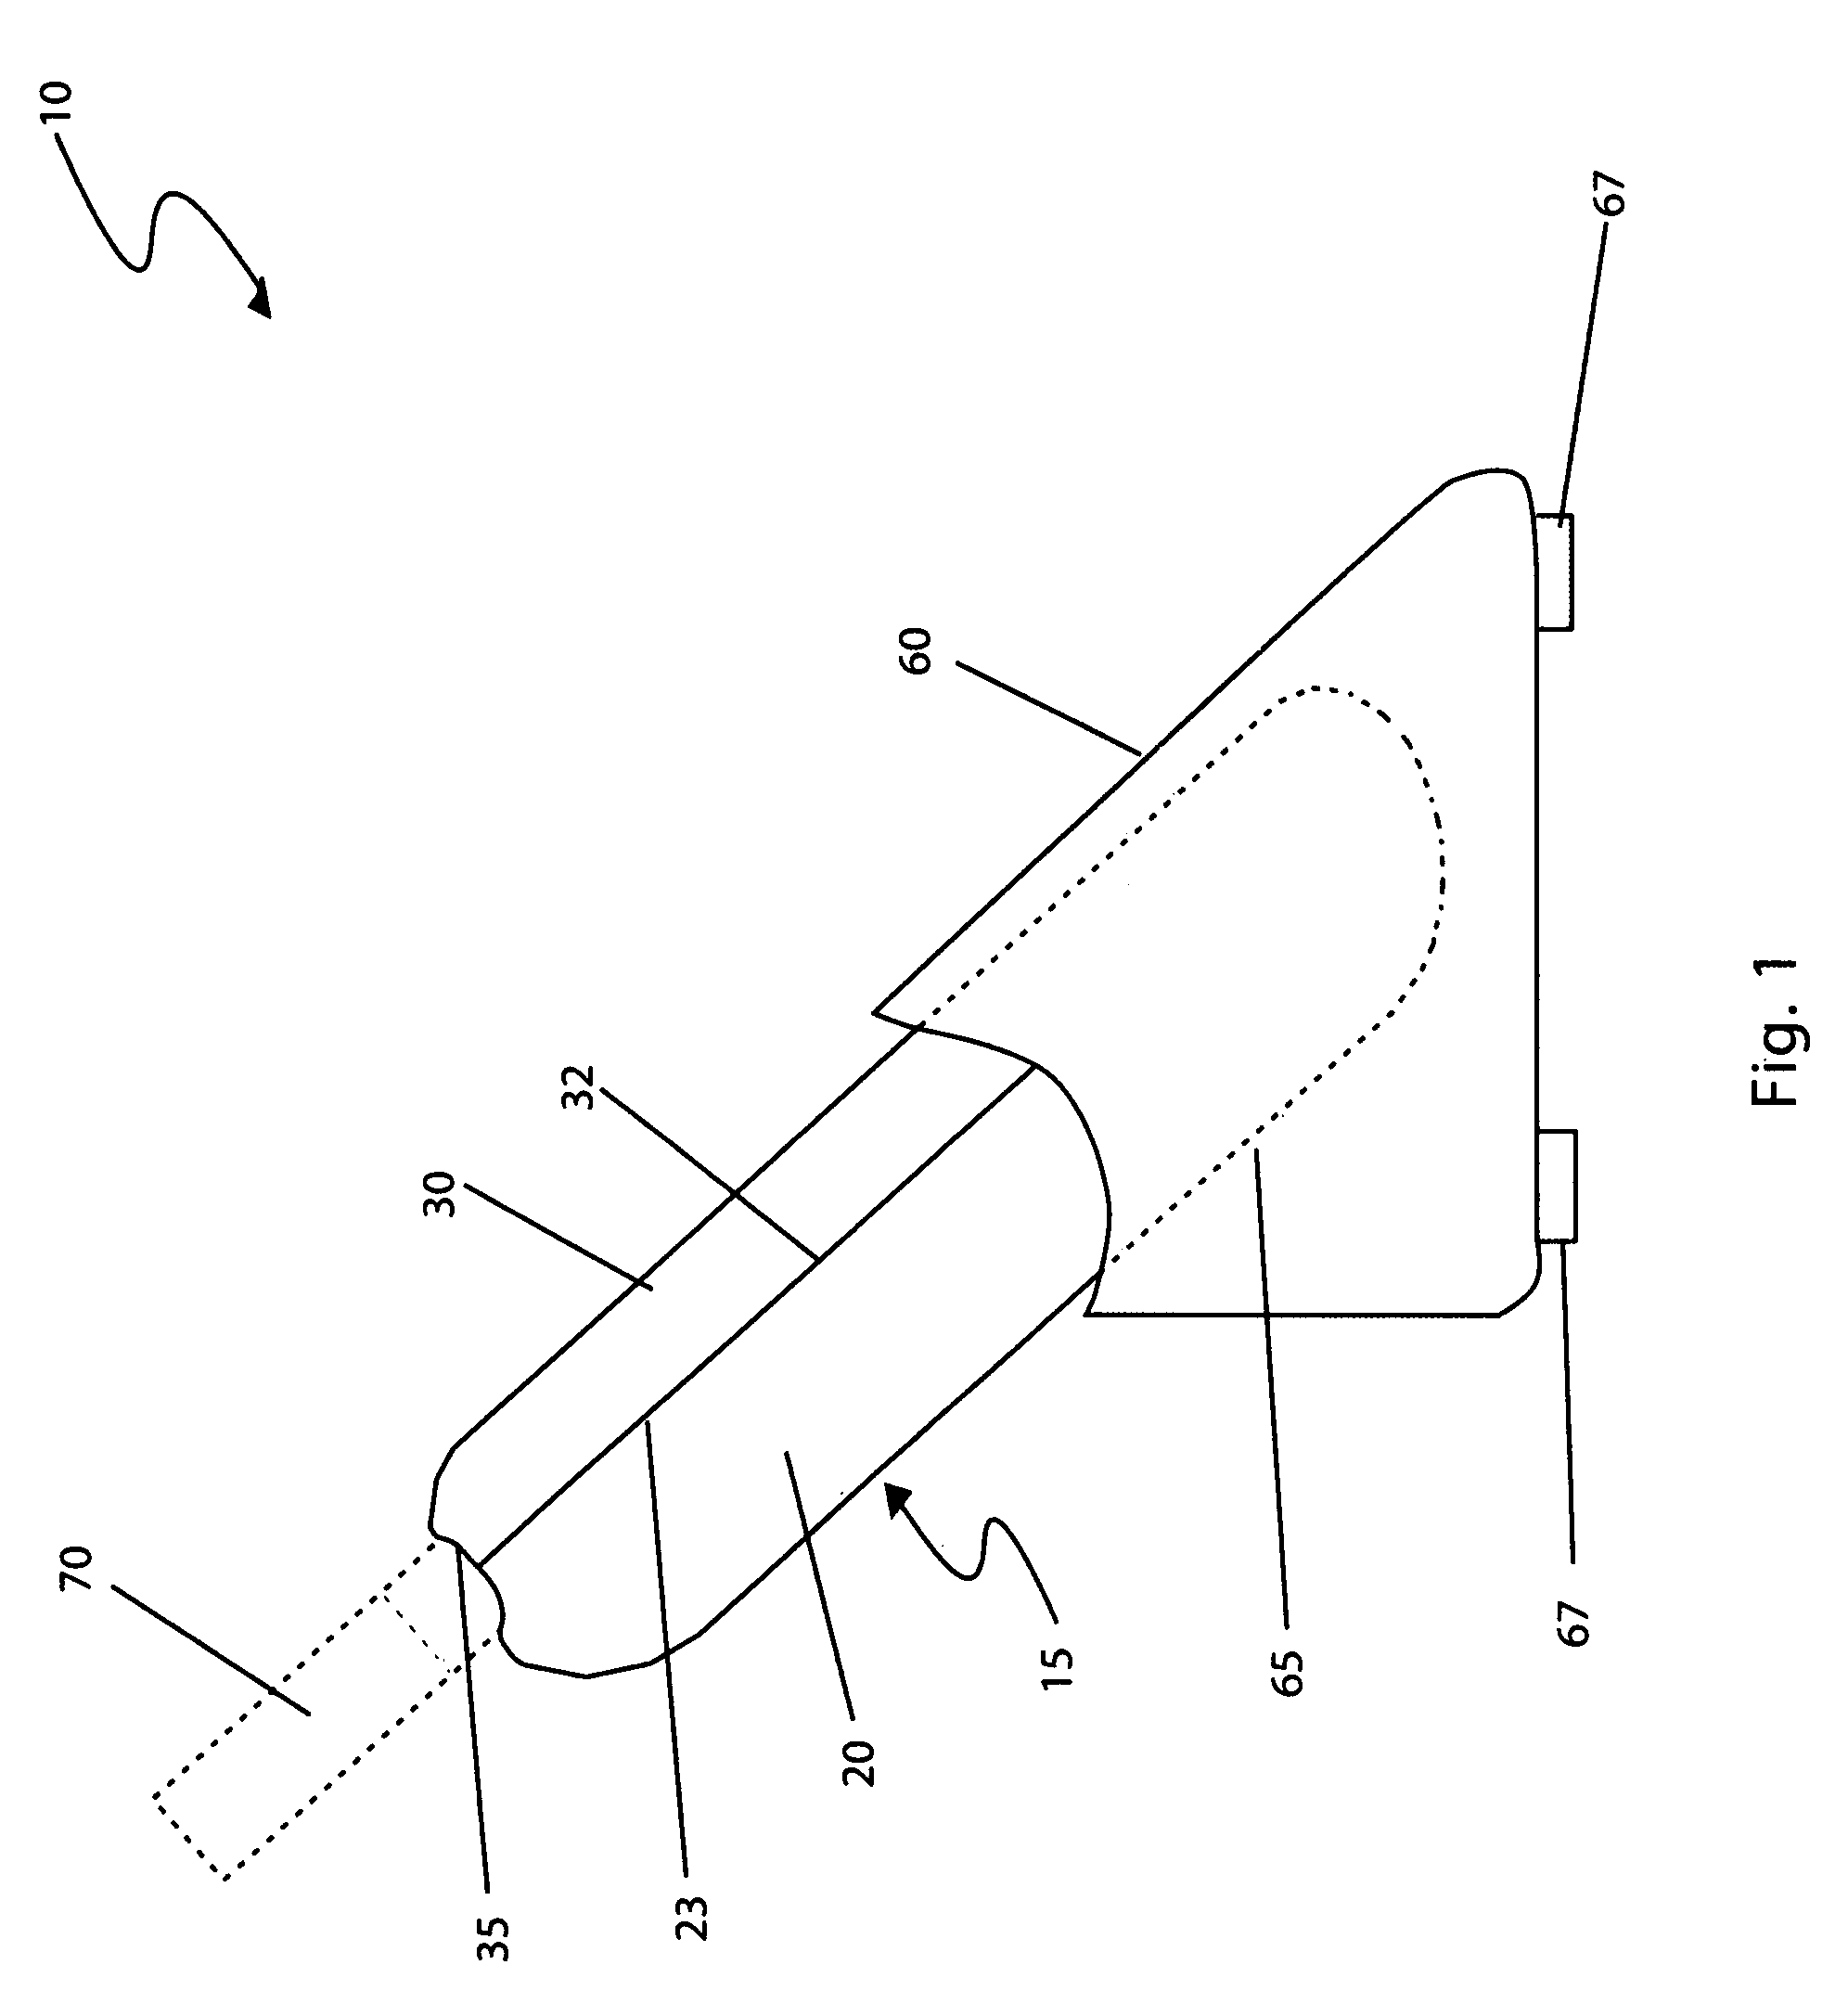 Filtration device for tobacco products